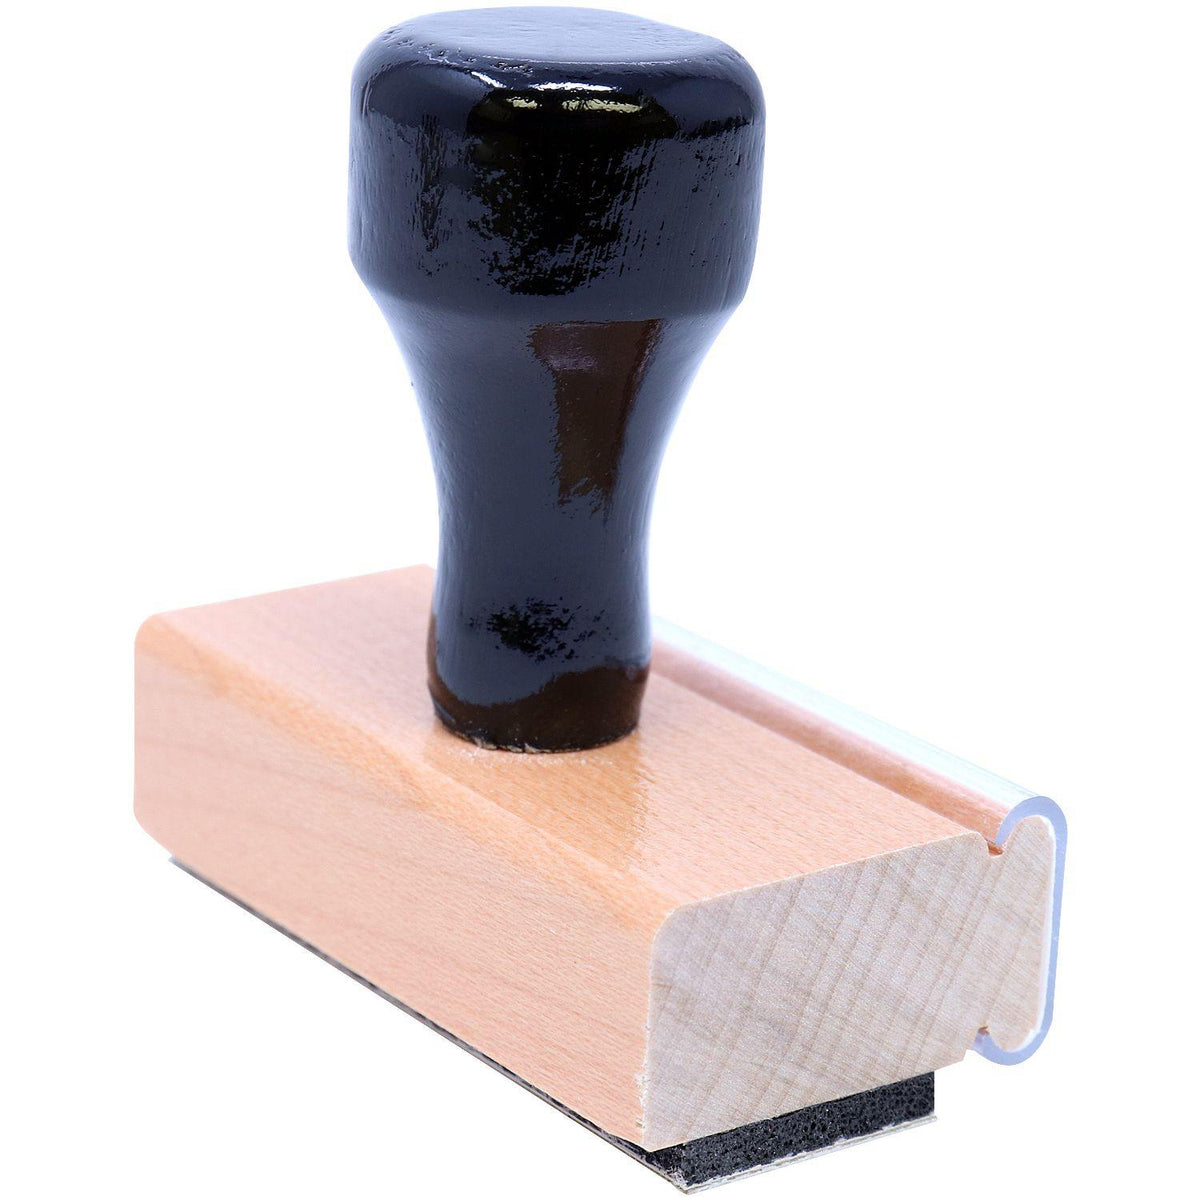 Large Stop Payment Rubber Stamp - Engineer Seal Stamps - Brand_Acorn, Impression Size_Large, Stamp Type_Regular Stamp, Type of Use_Finance